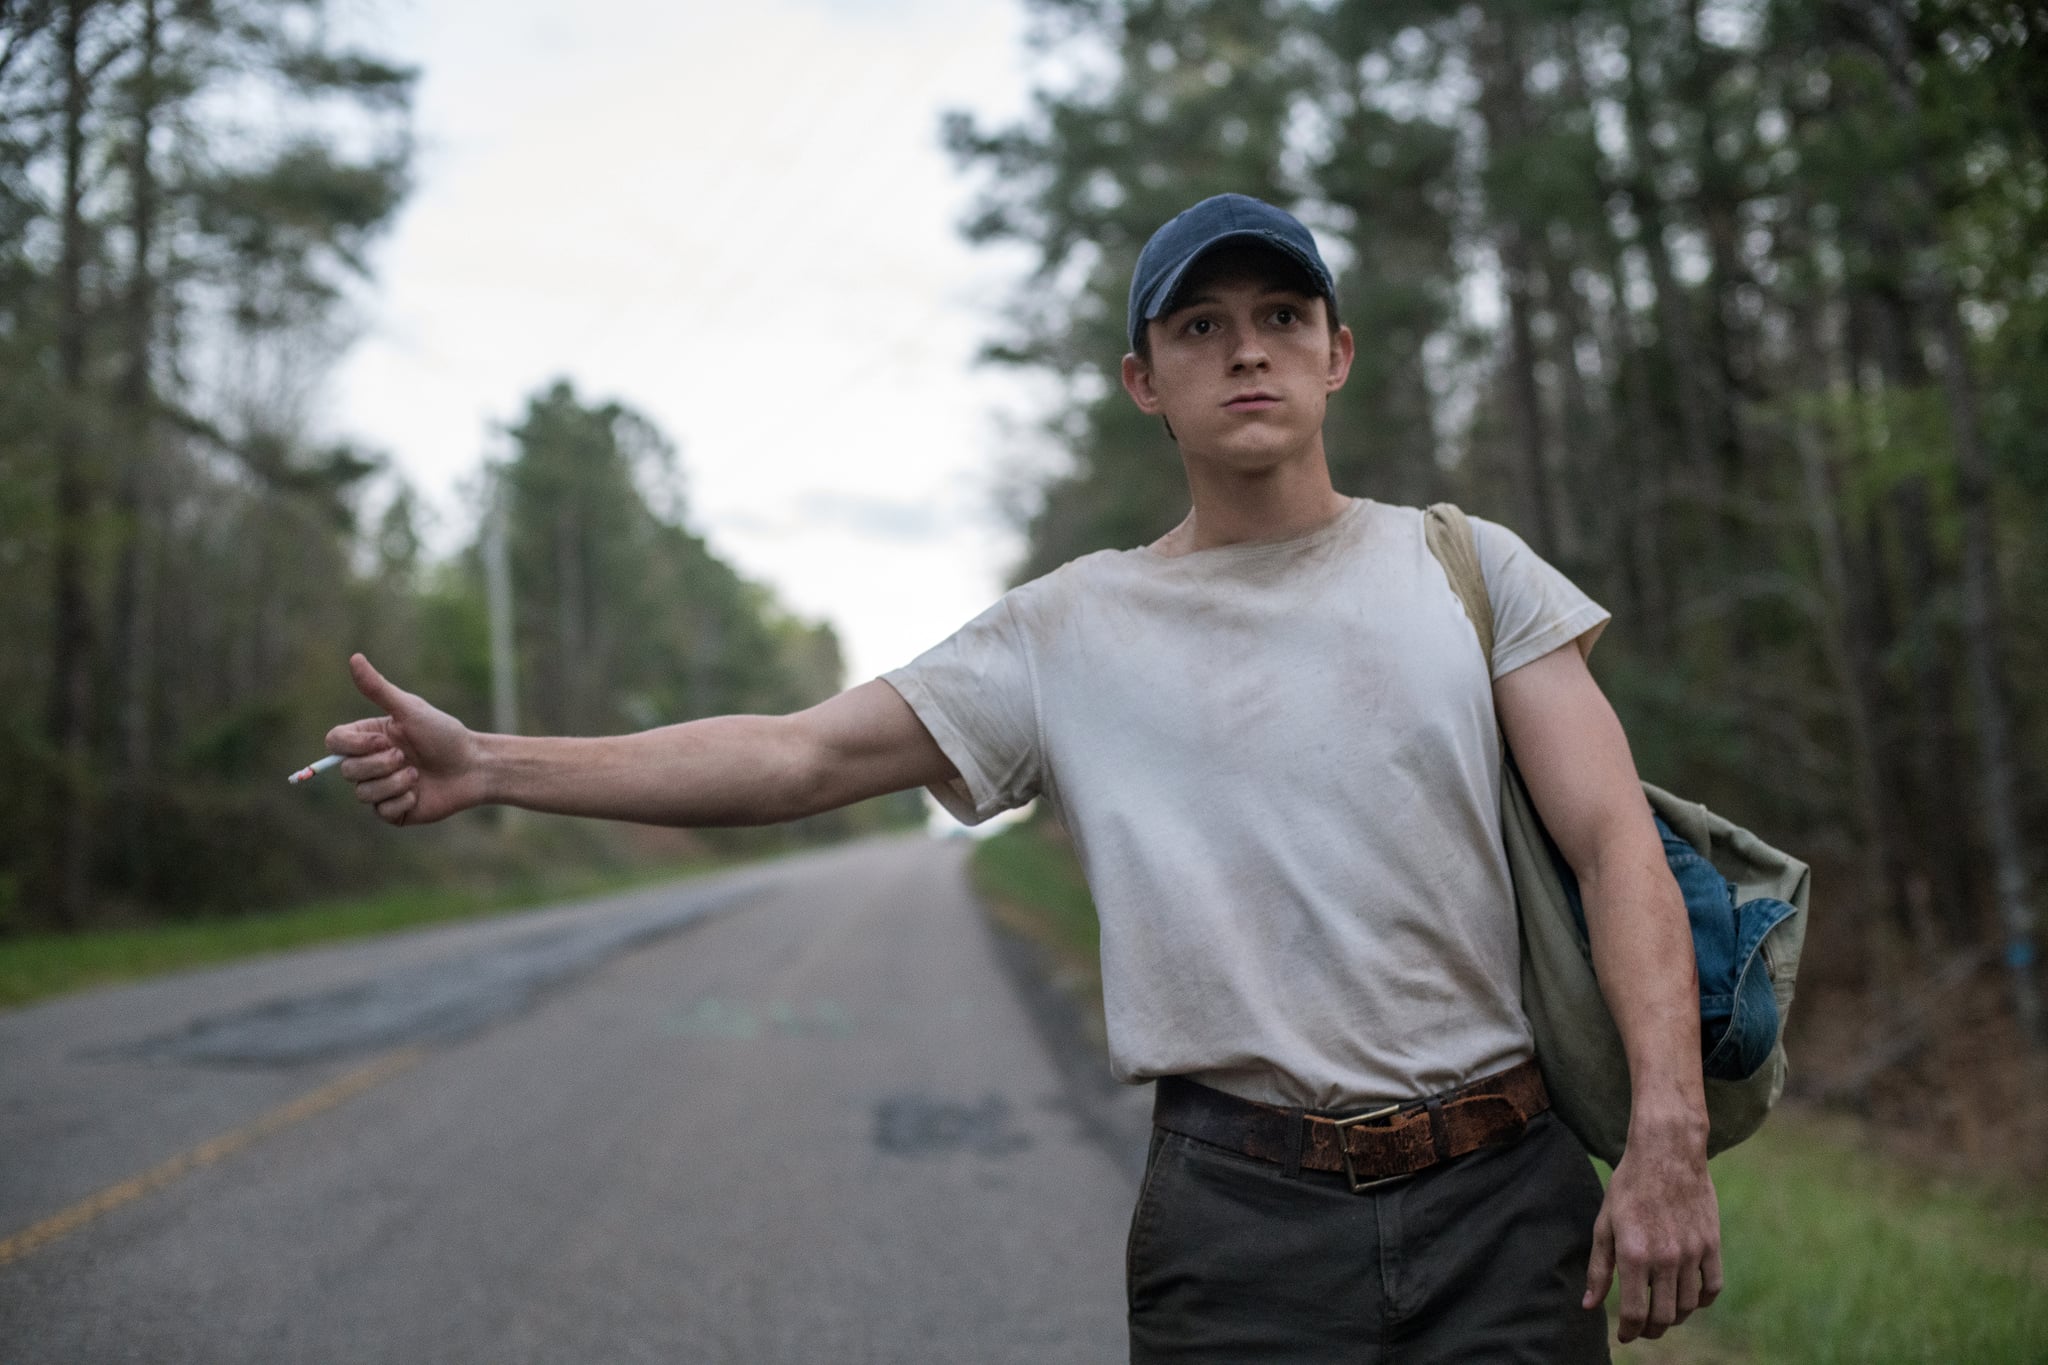 The Devil All The Time: Tom Holland as Arvin Russell. Photo Cr. Glen Wilson/Netflix © 2020